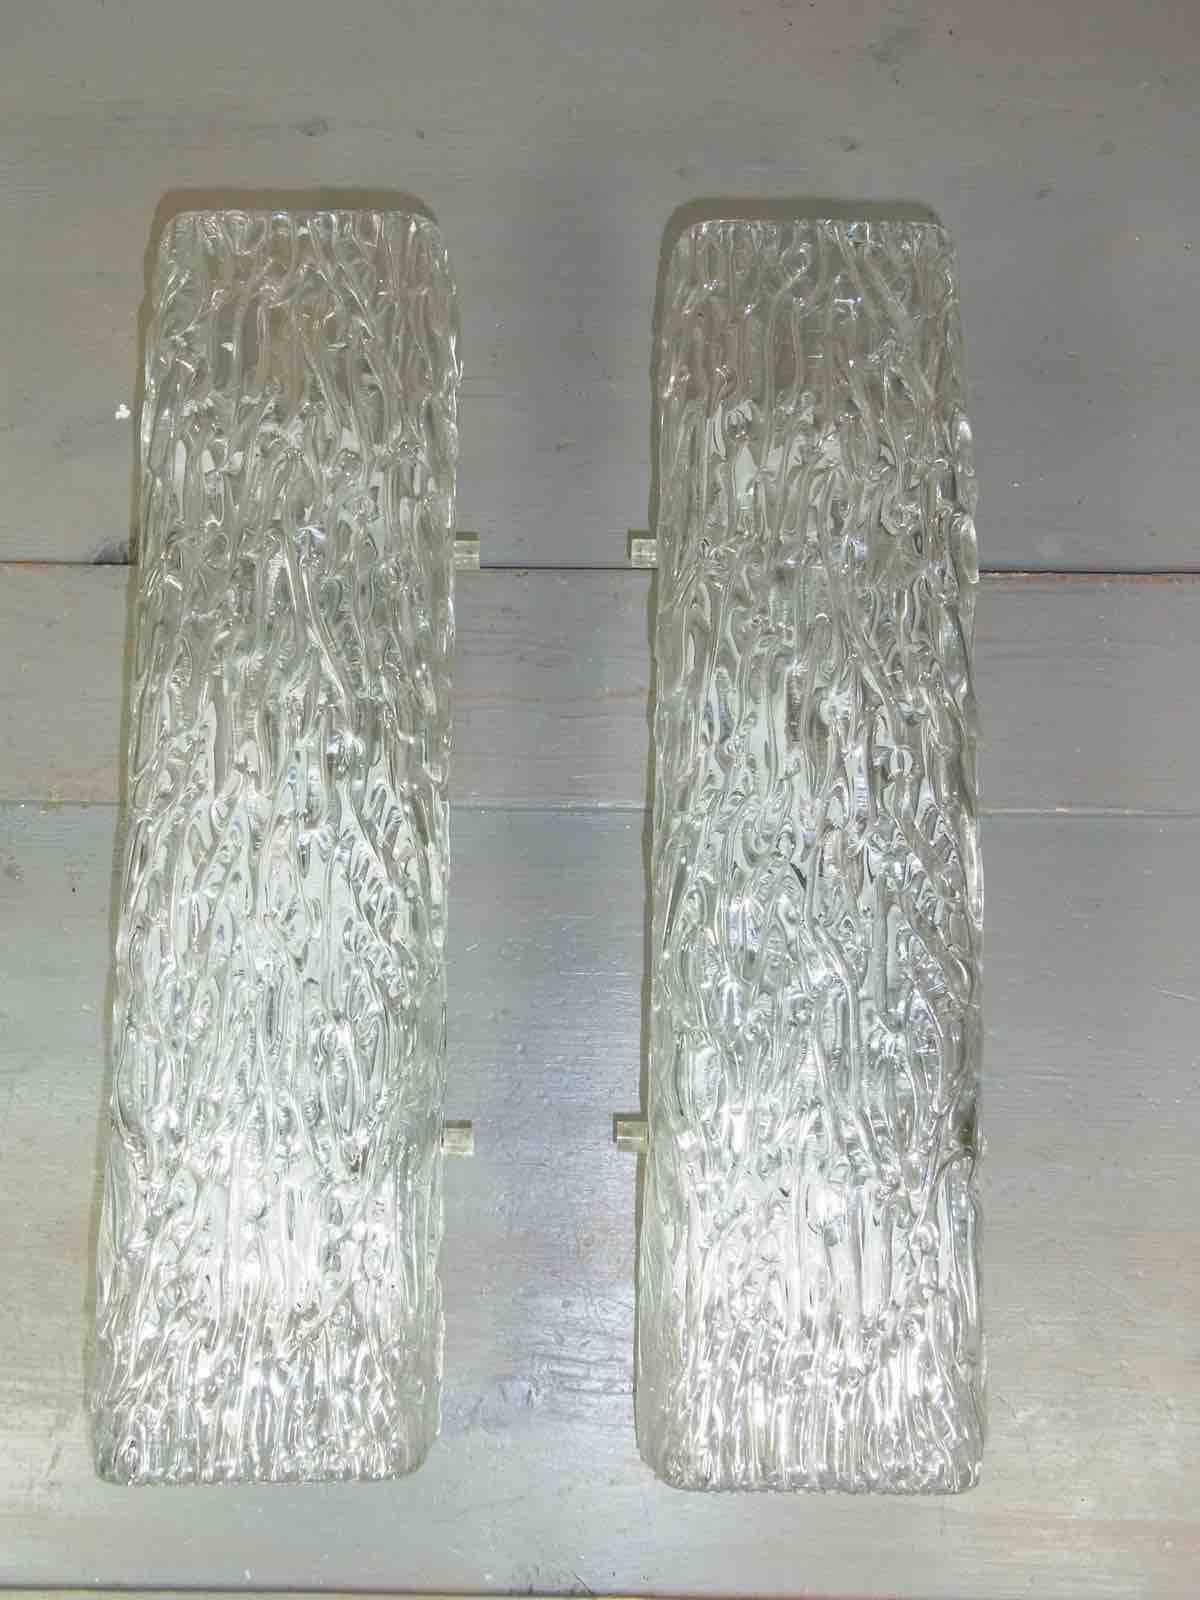 A pair of heavily textured ice glass vanity sconces. Thick ice glass on a backplate. Each fixture requires three European E14 candelabra bulbs, each bulb up to 40 watts.